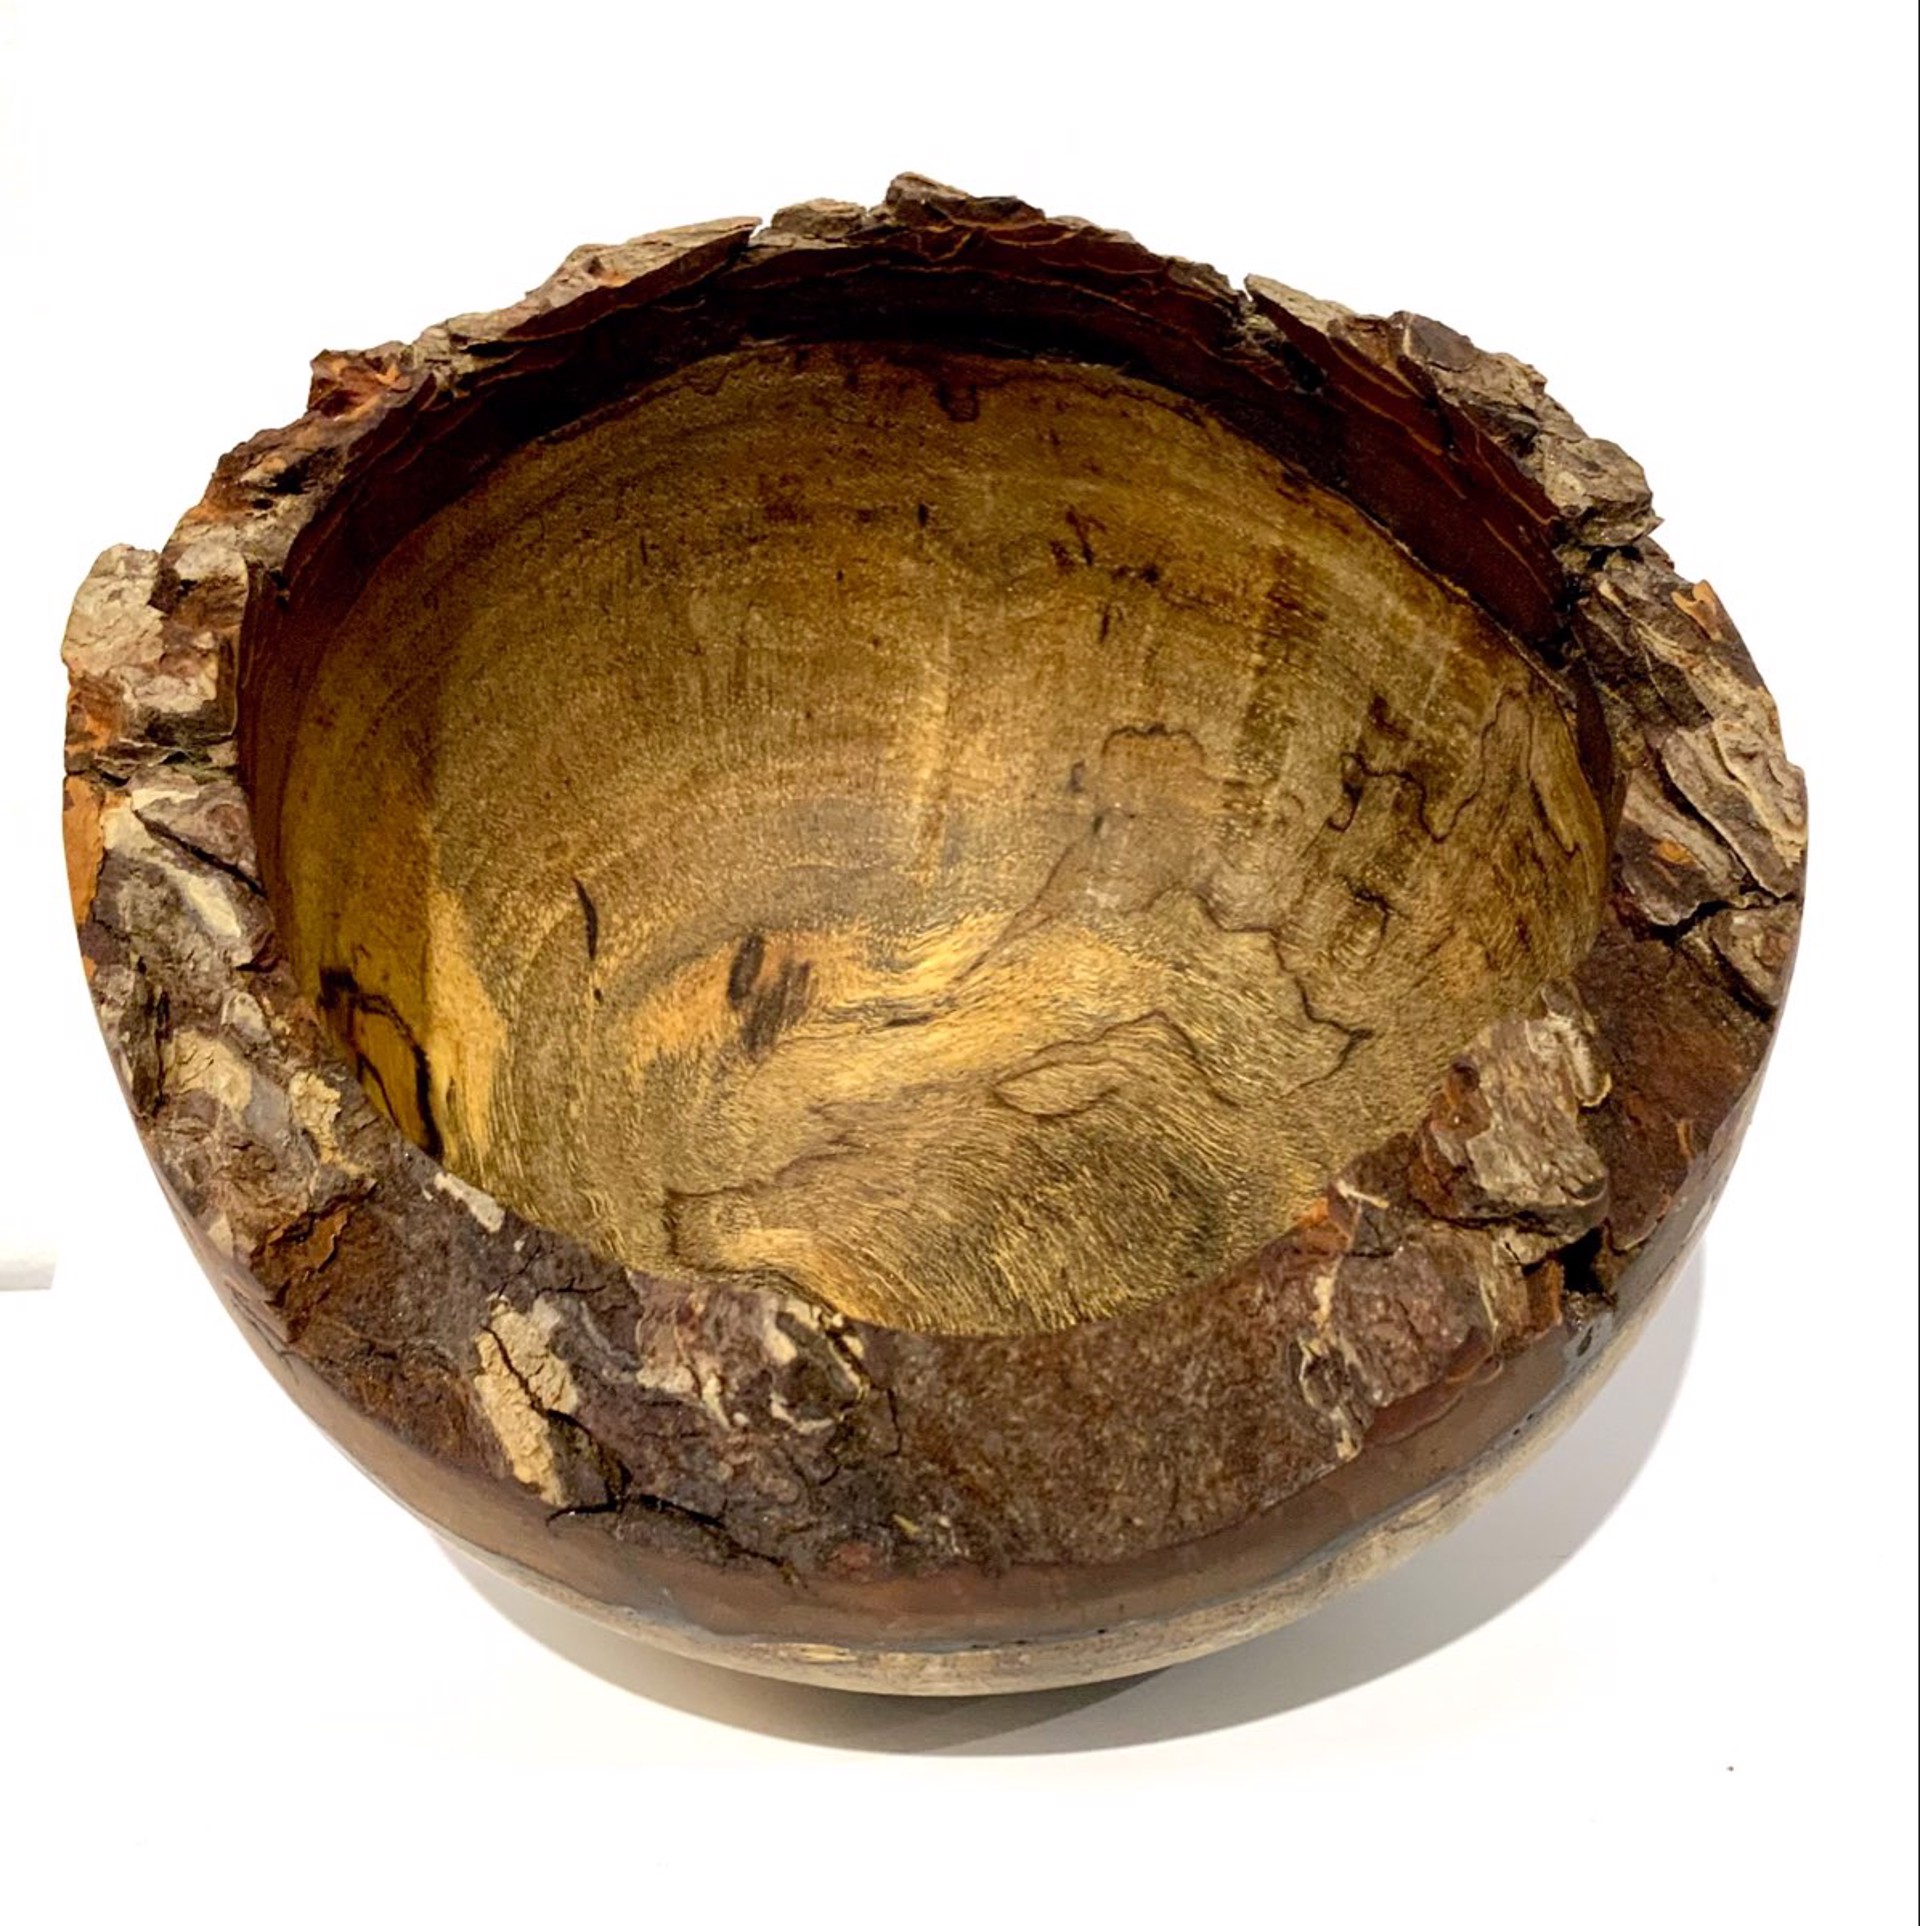 Splayed Sycamore Bowl by Tom Leazenby